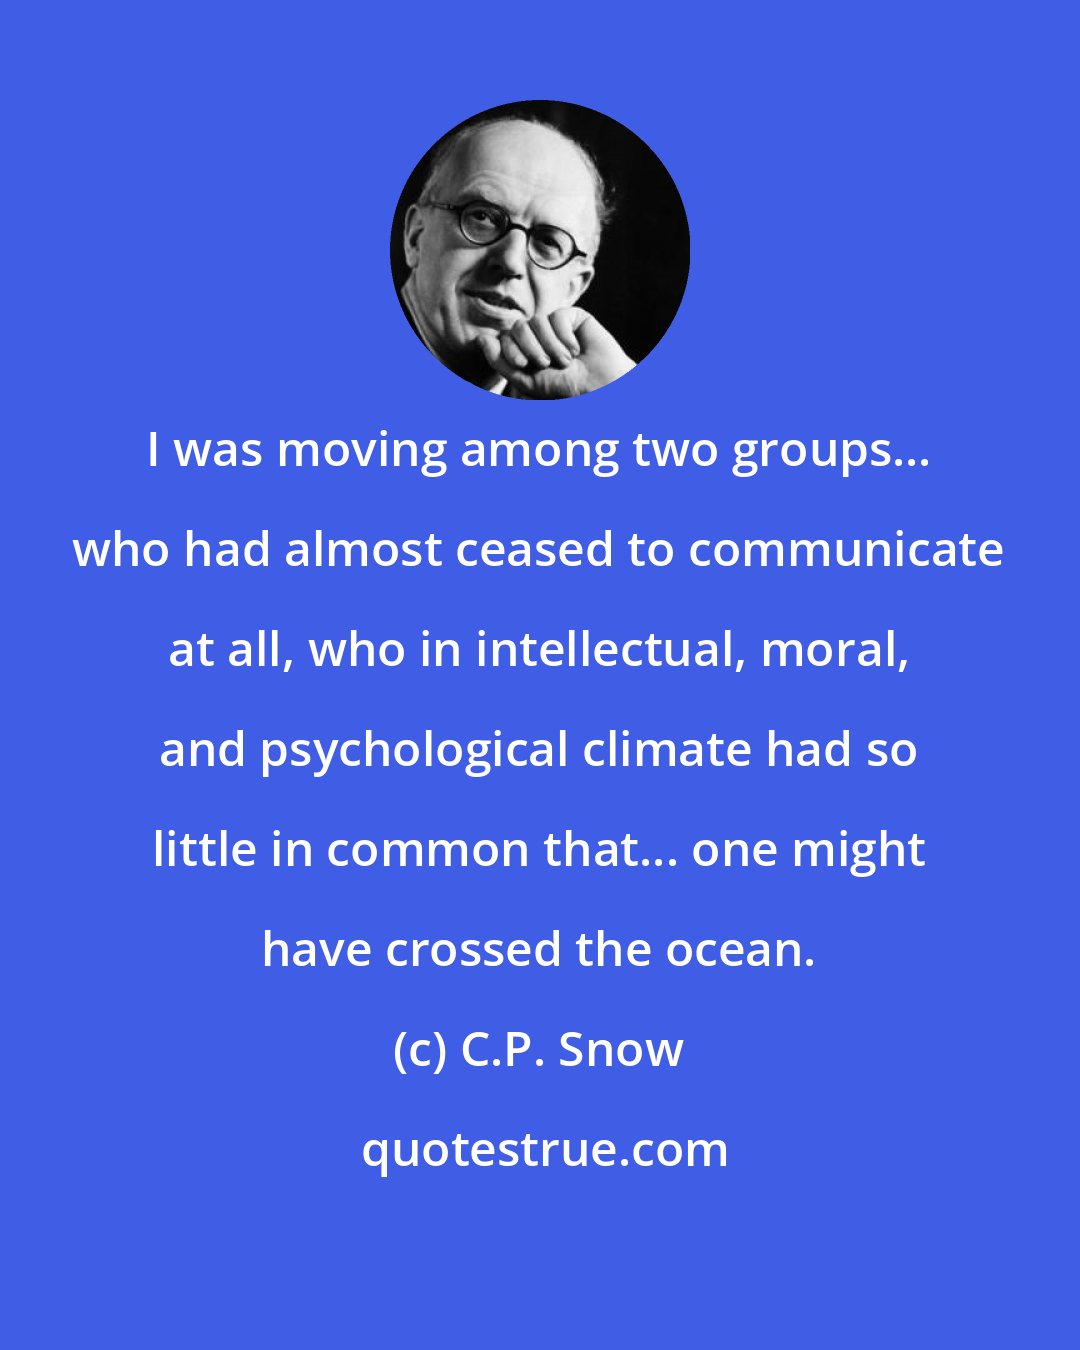 C.P. Snow: I was moving among two groups... who had almost ceased to communicate at all, who in intellectual, moral, and psychological climate had so little in common that... one might have crossed the ocean.